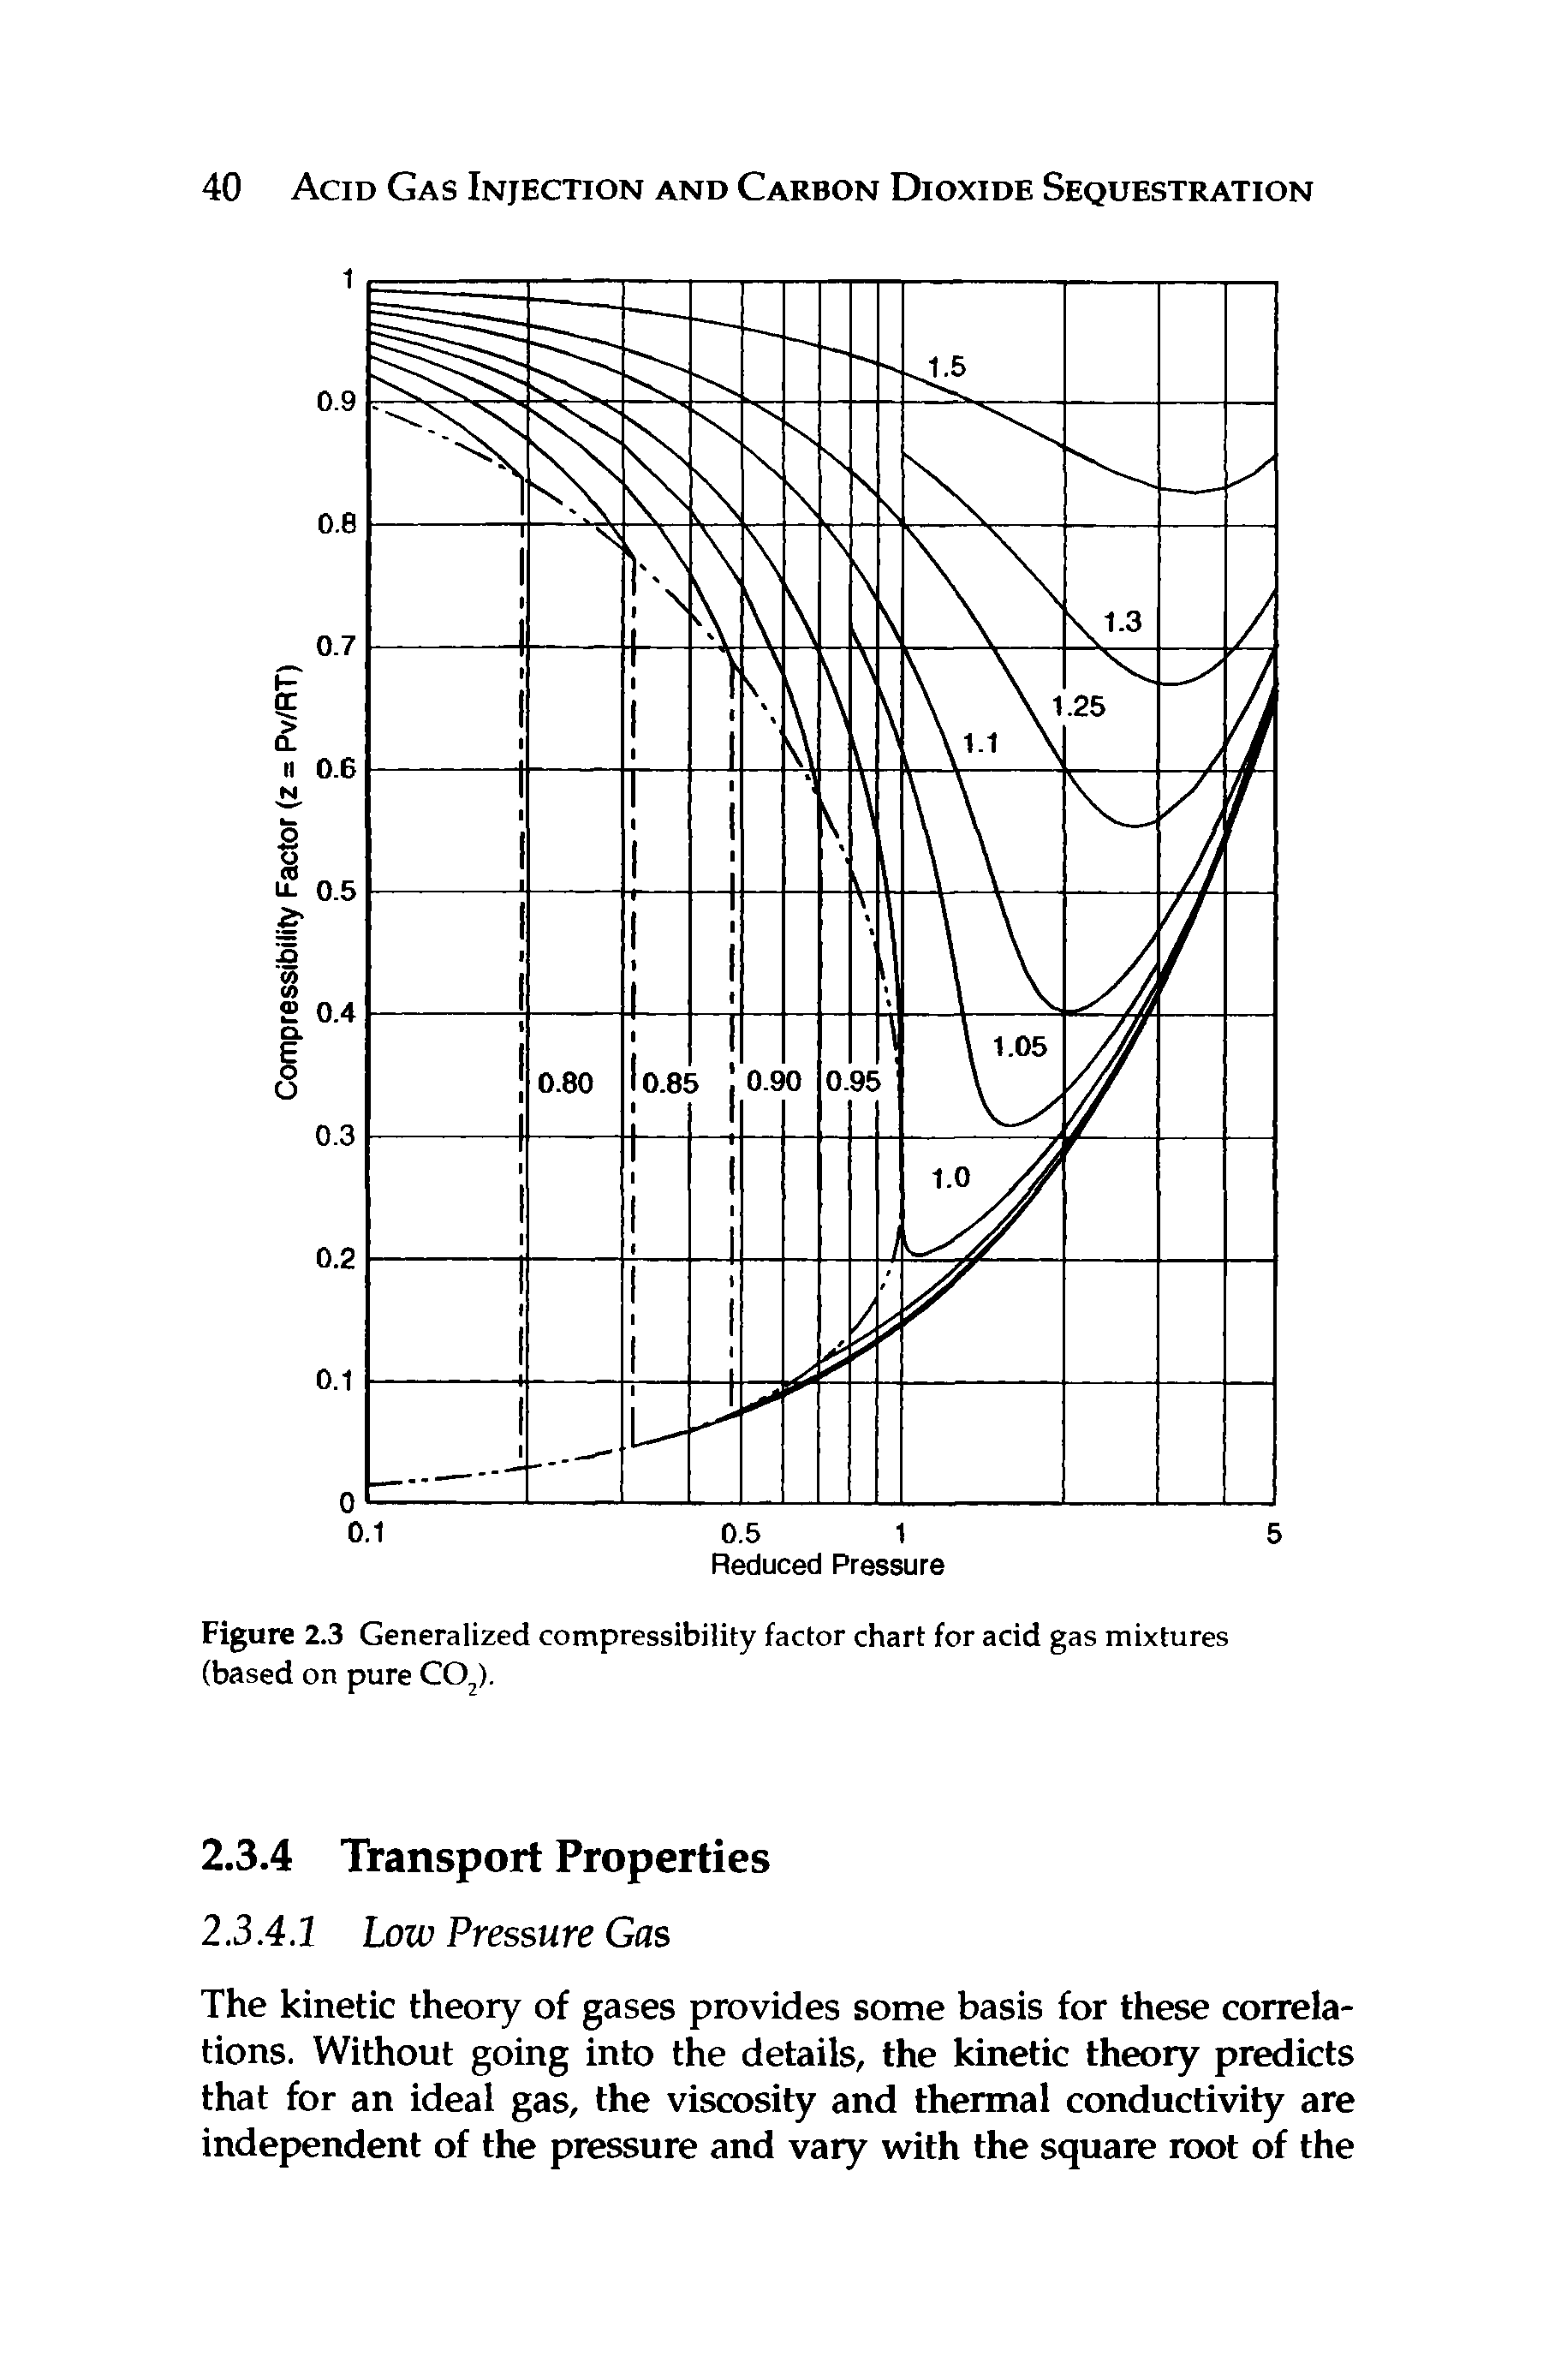 Figure 2.3 Generalized compressibility factor chart for acid gas mixtures (based on pure C02).